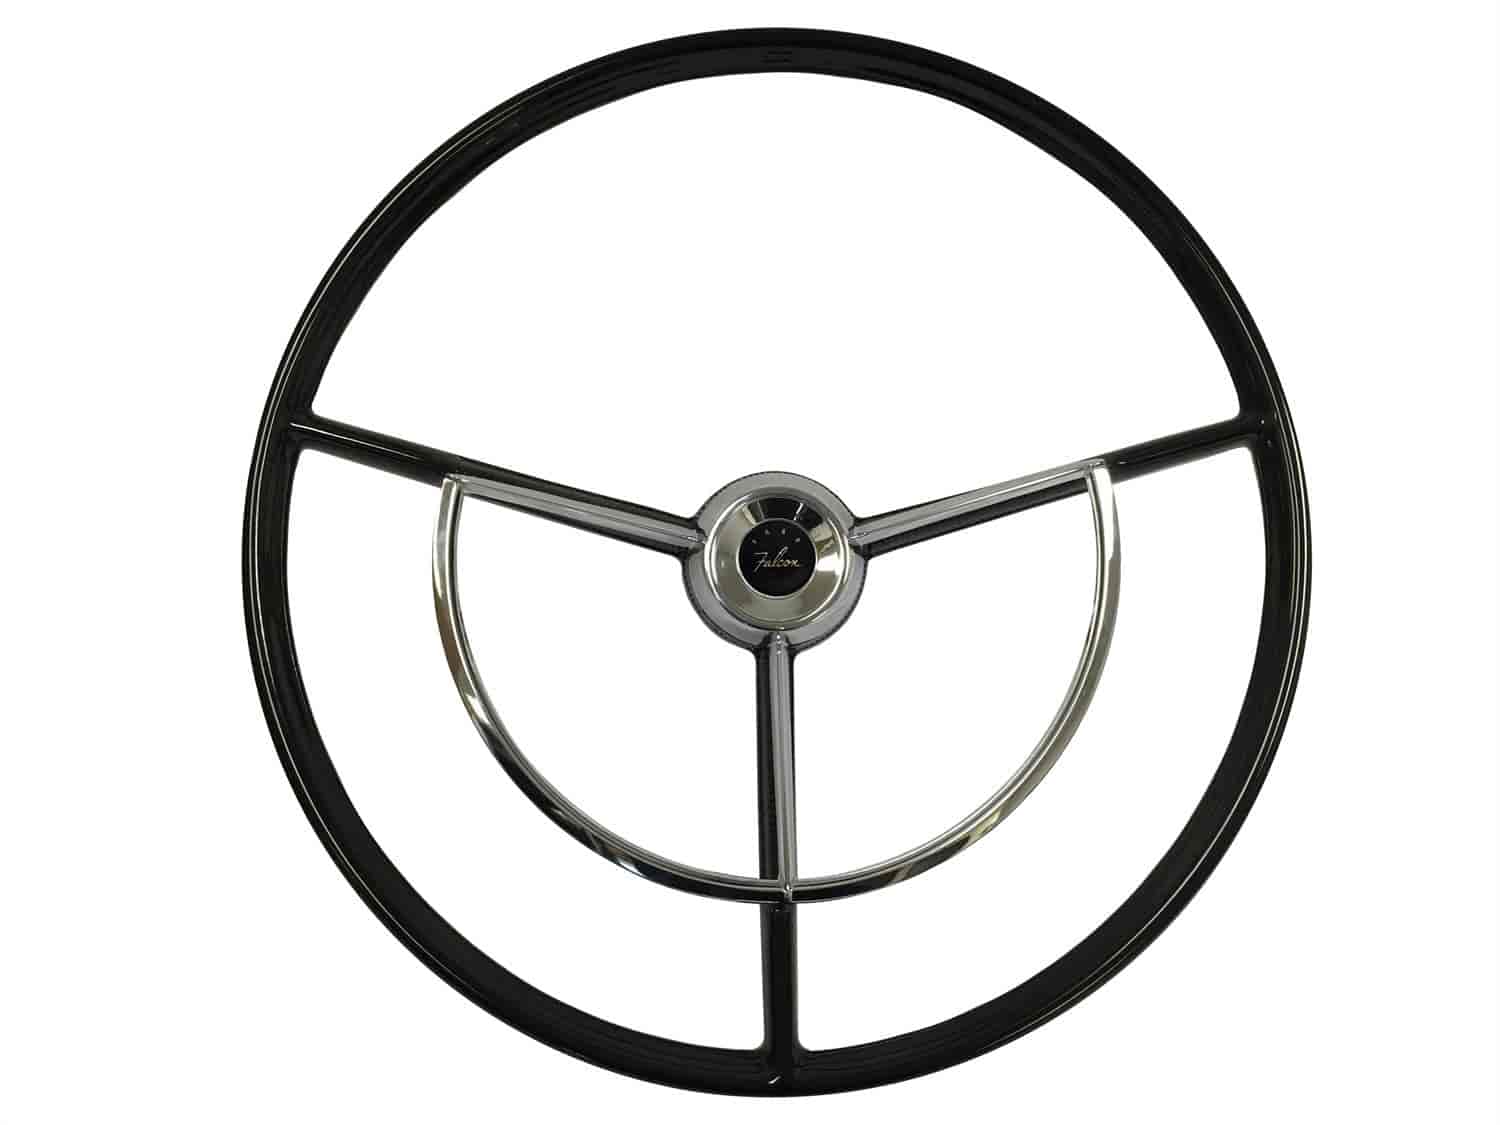 OE-Series Steering Wheel Kit 1960-71 Classic Ford, 17 in. Diameter, Gloss Black Finish, w/ Horn Spring, Contact Kit & Emblem